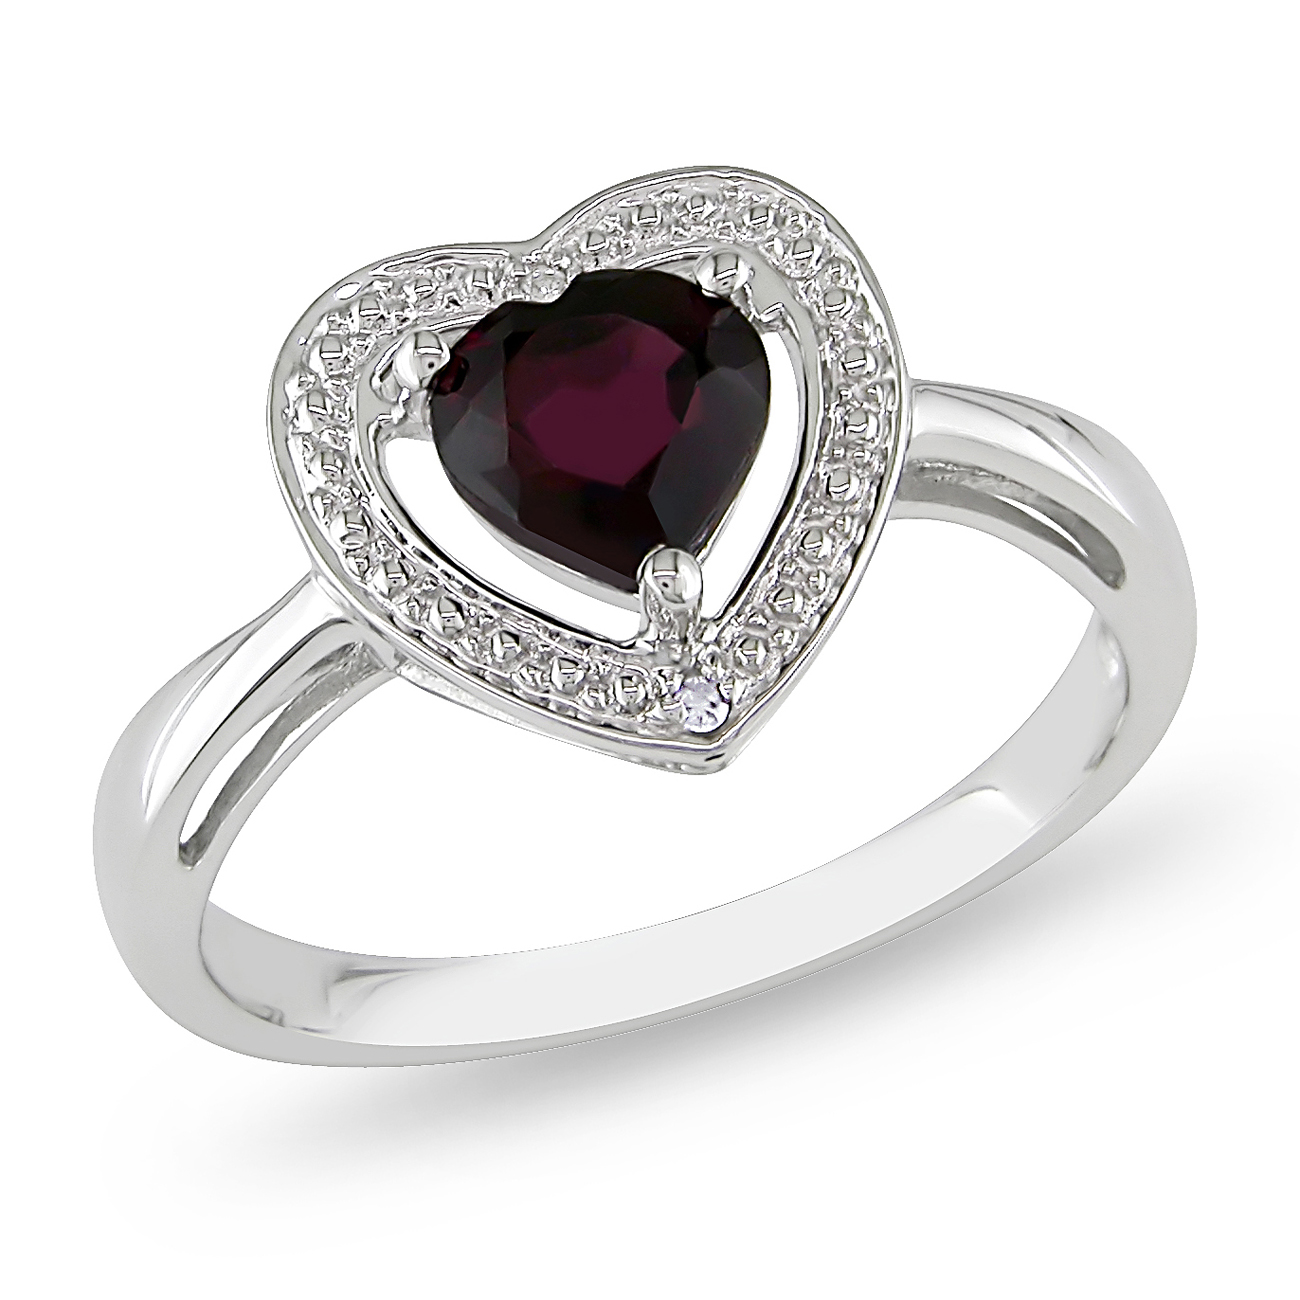 Amour 0.01 Carat T.W. Diamond and 3/4 Carat T.G.W. Garnet Heart Ring in Sterling Silver GH I3